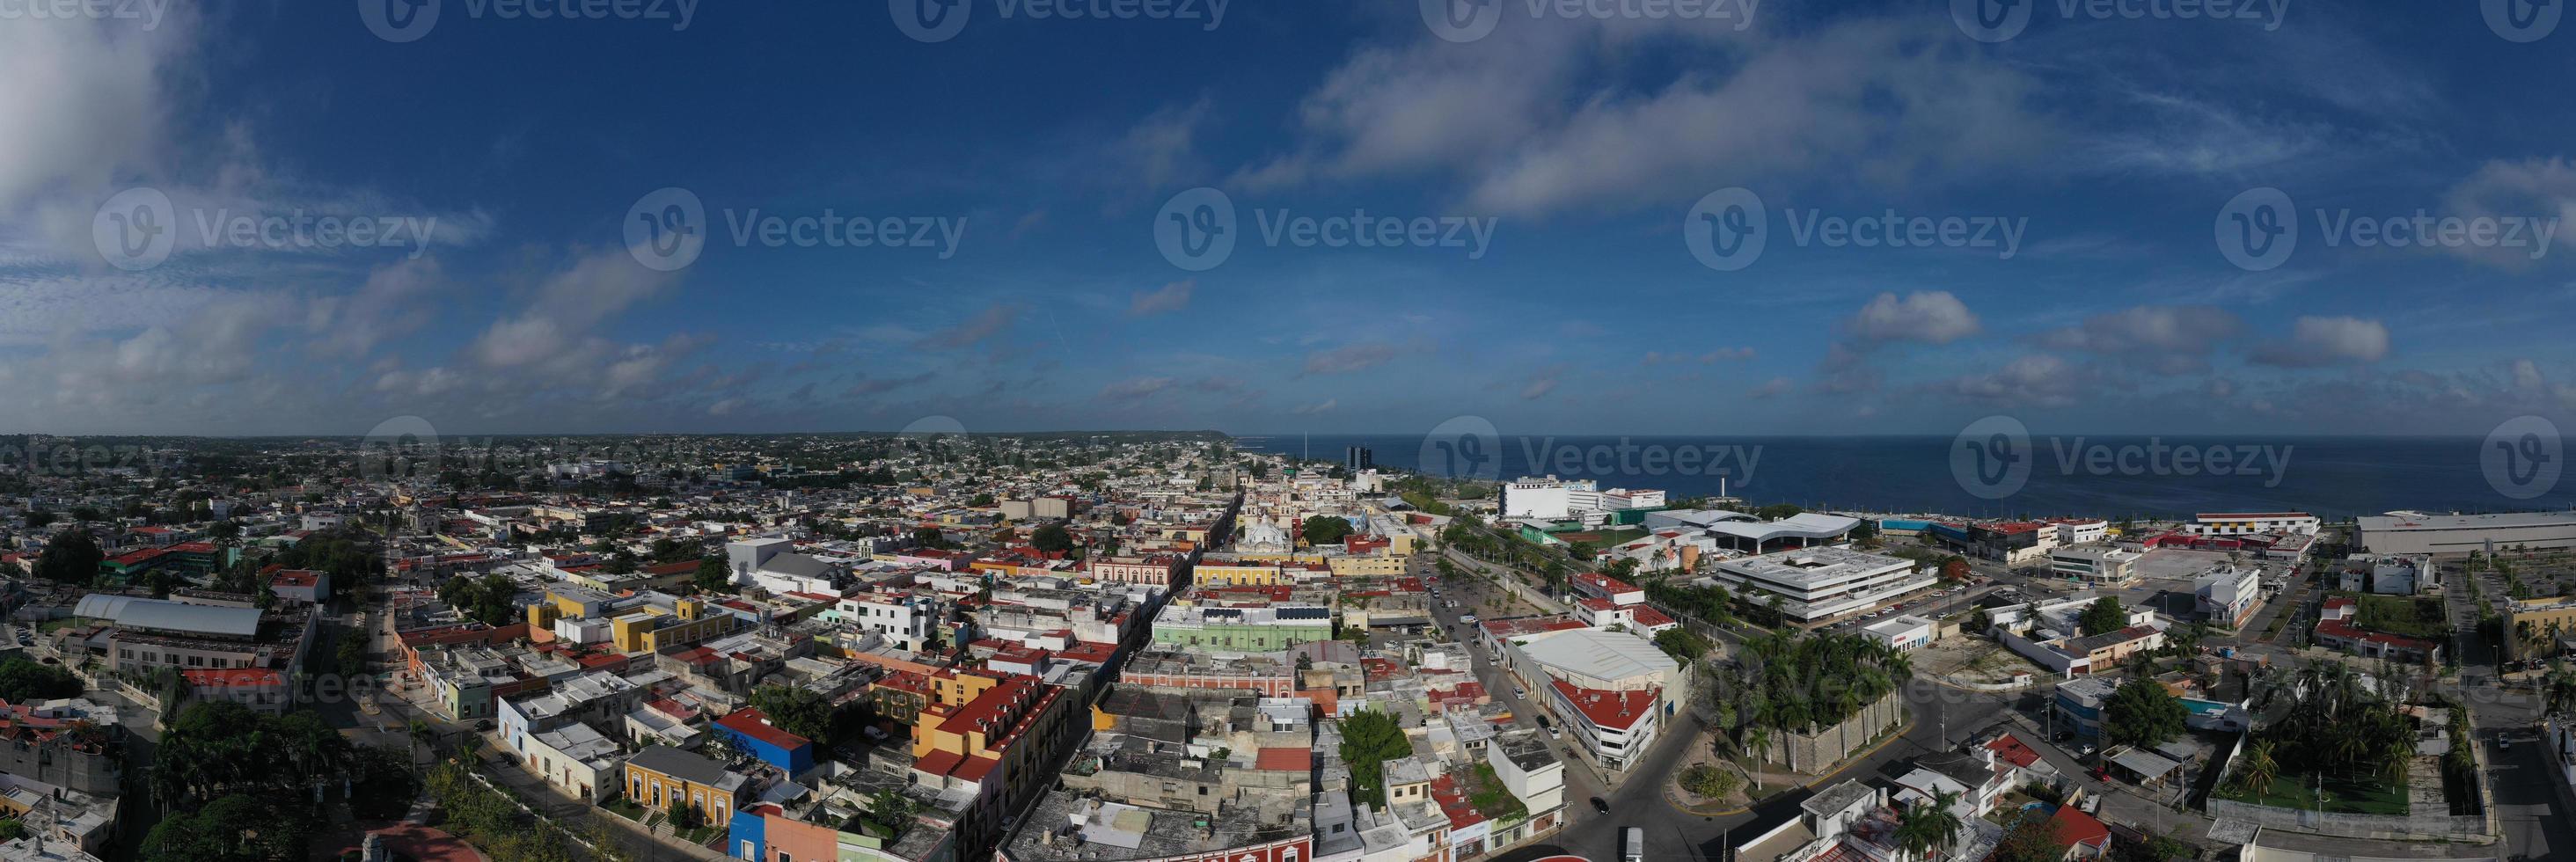 Panoramic view of the skyline of Campeche, the capital of the state of Campeche, a World Heritage Site in Mexico. photo